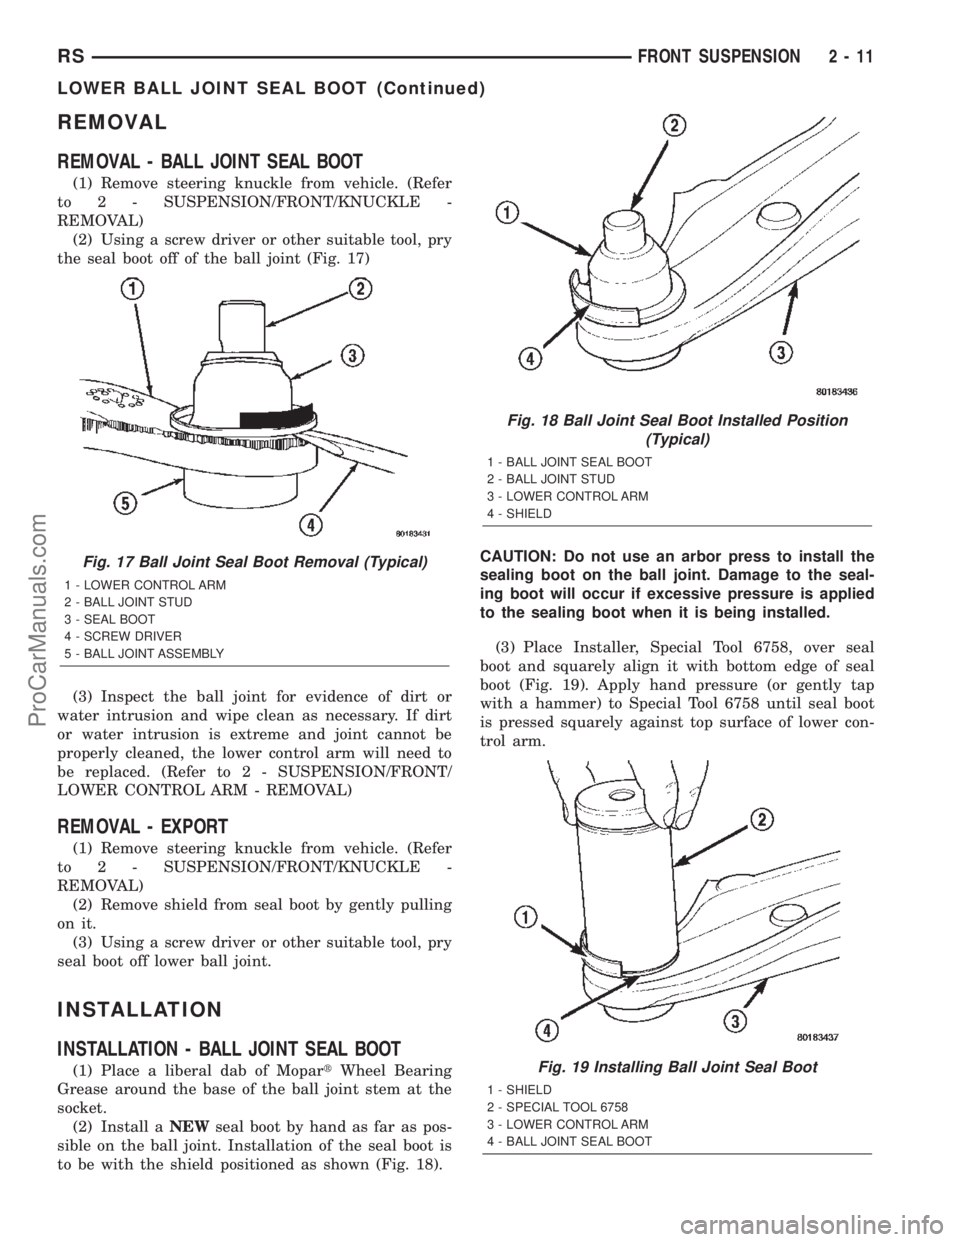 CHRYSLER VOYAGER 2002  Service Manual REMOVAL
REMOVAL - BALL JOINT SEAL BOOT
(1) Remove steering knuckle from vehicle. (Refer
to 2 - SUSPENSION/FRONT/KNUCKLE -
REMOVAL)
(2) Using a screw driver or other suitable tool, pry
the seal boot of